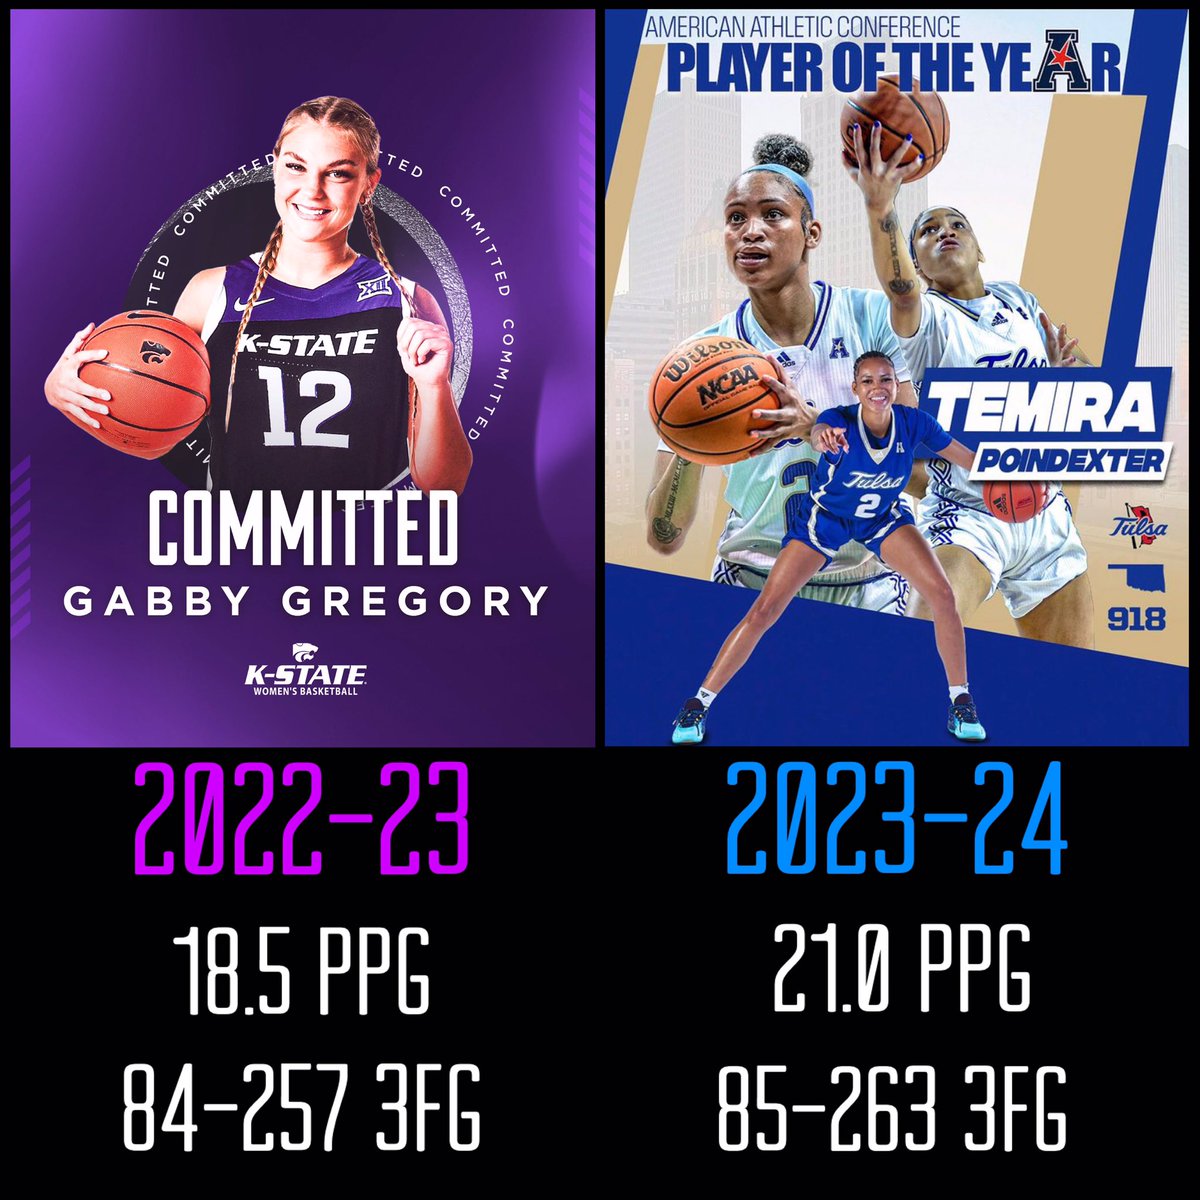 2 years ago @JeffMittie and @KStateWBB landed Tulsa native Gabby Gregory in the transfer portal and she went out to become an instant star and fan favorite. Could they be on the verge of doing it again this year with Tulsa sharpshooter Temira Pointdexter? 👀